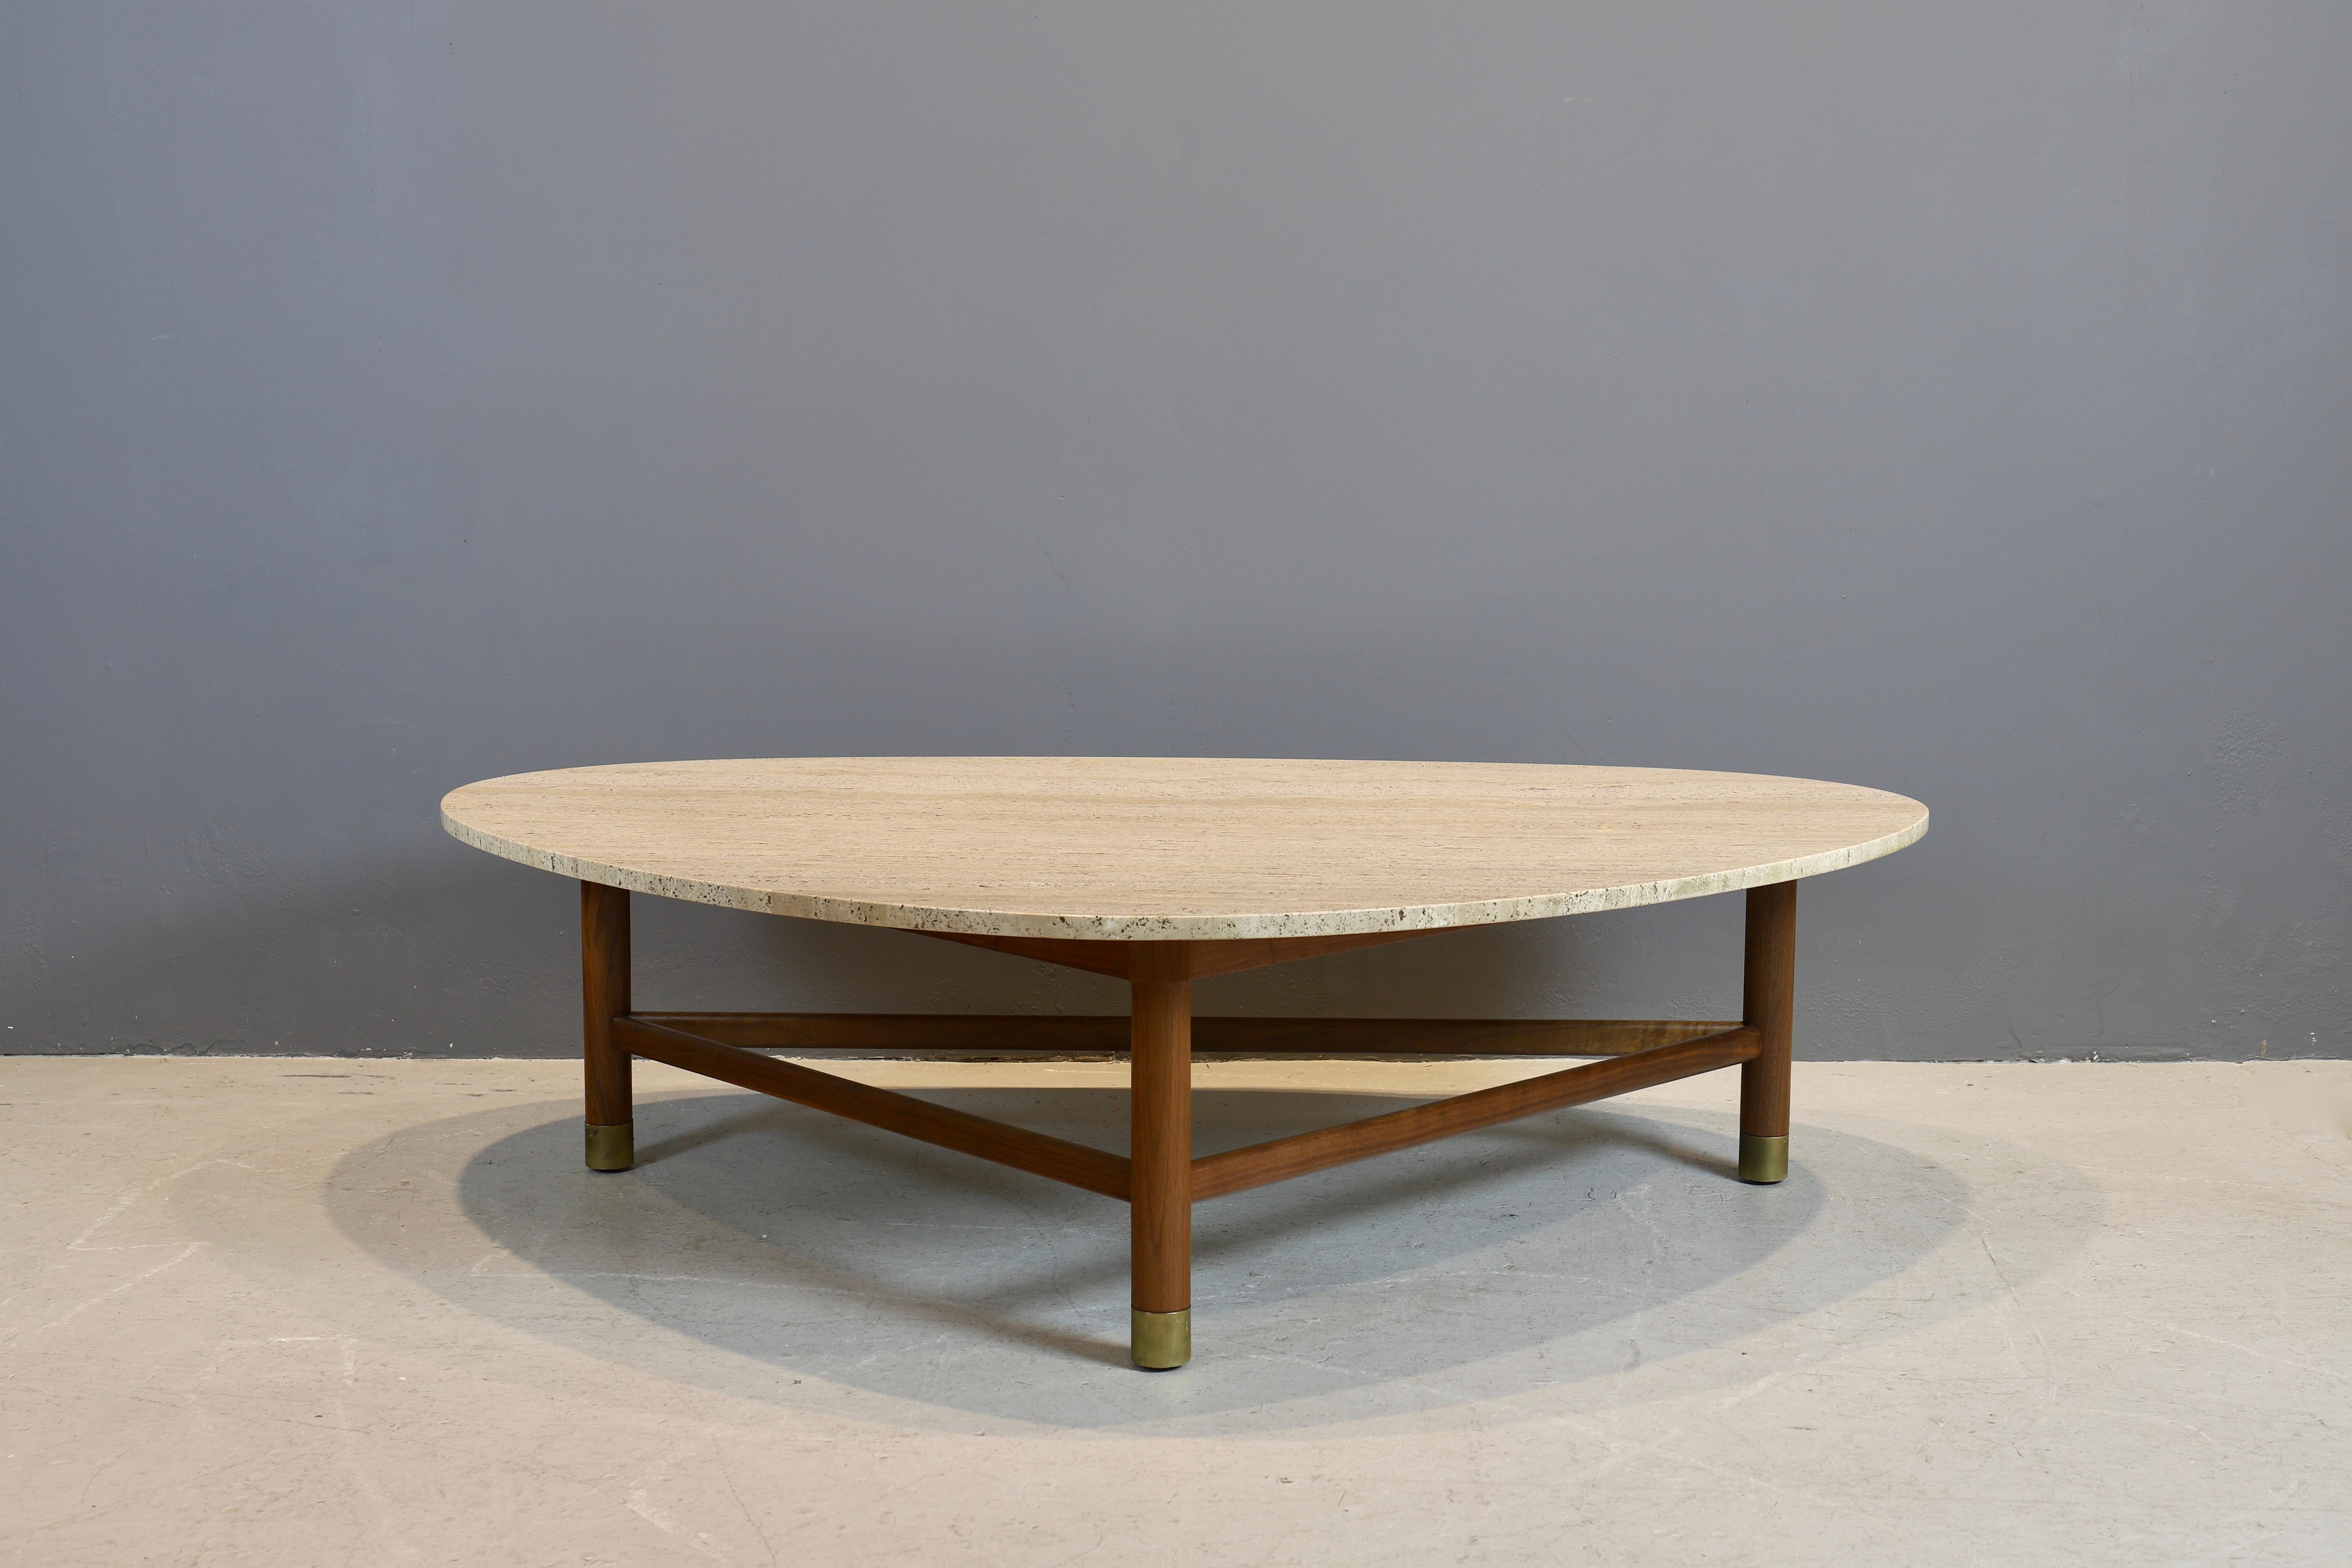 Harvey Probber coffee table with triangular shaped travertine top and walnut base.
Brass caps on feet.
Travertine top is original to the table.
You can view this table in my gallery in NYC.